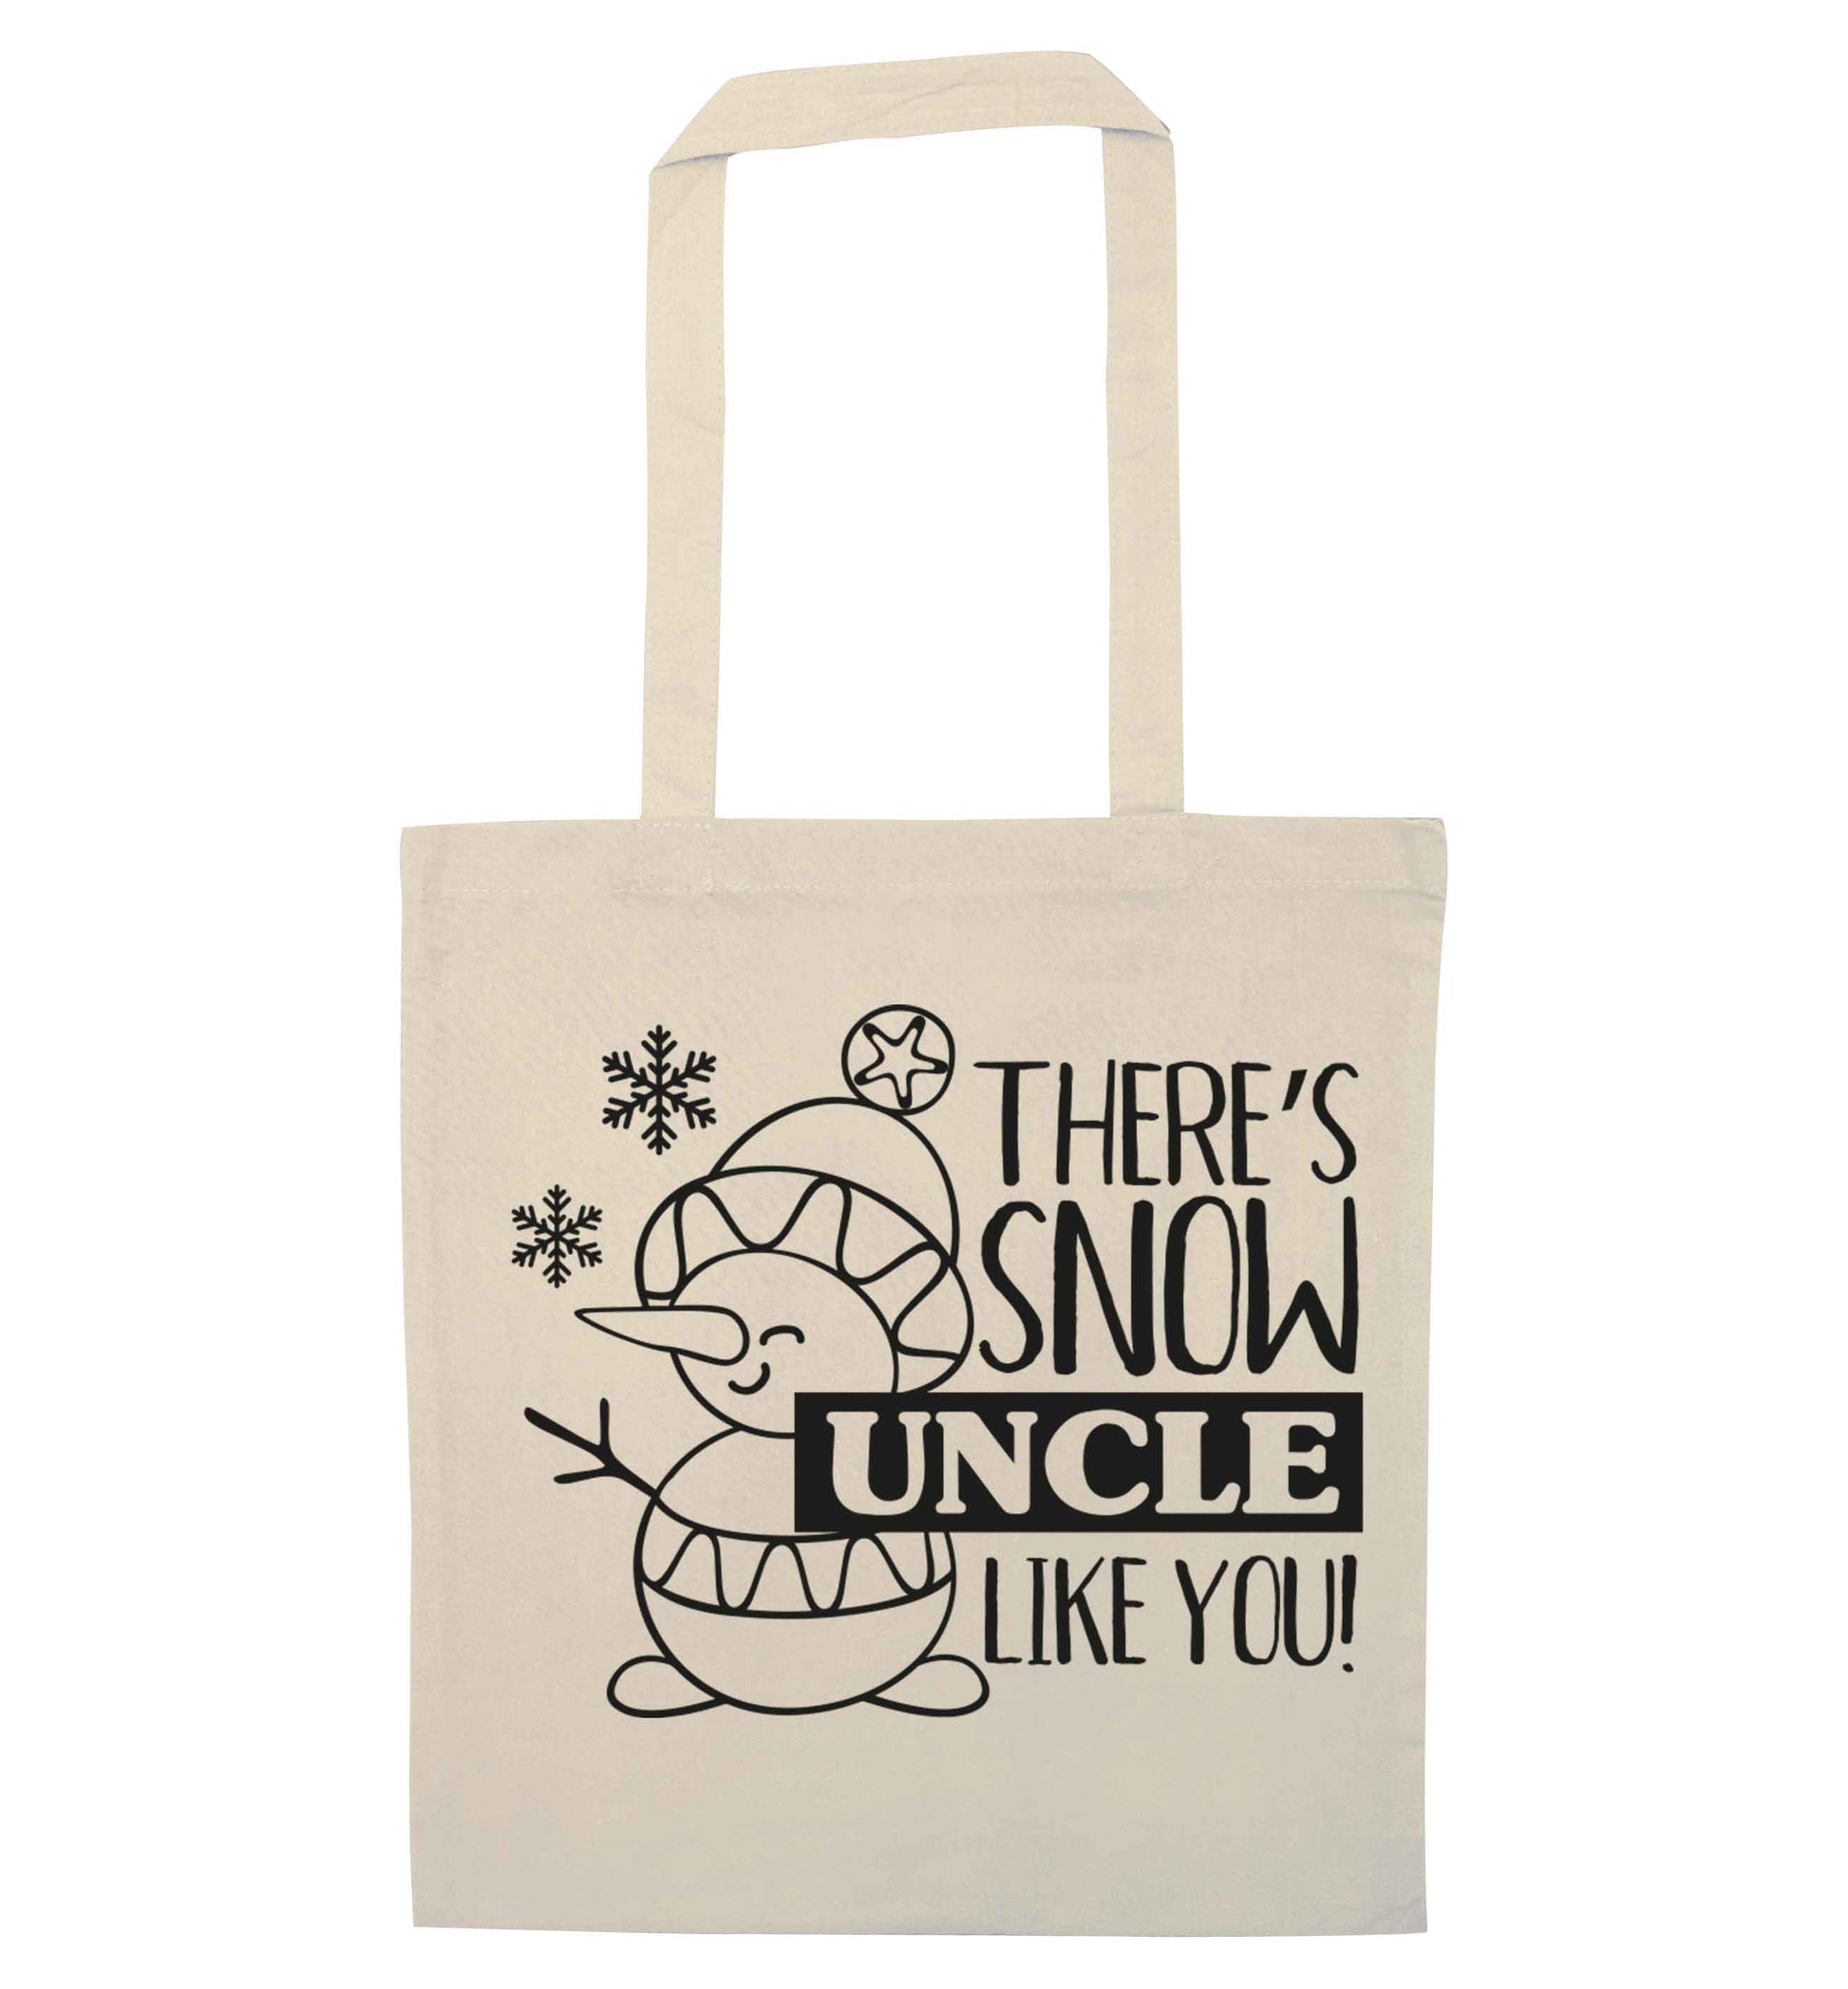 There's snow uncle like you natural tote bag